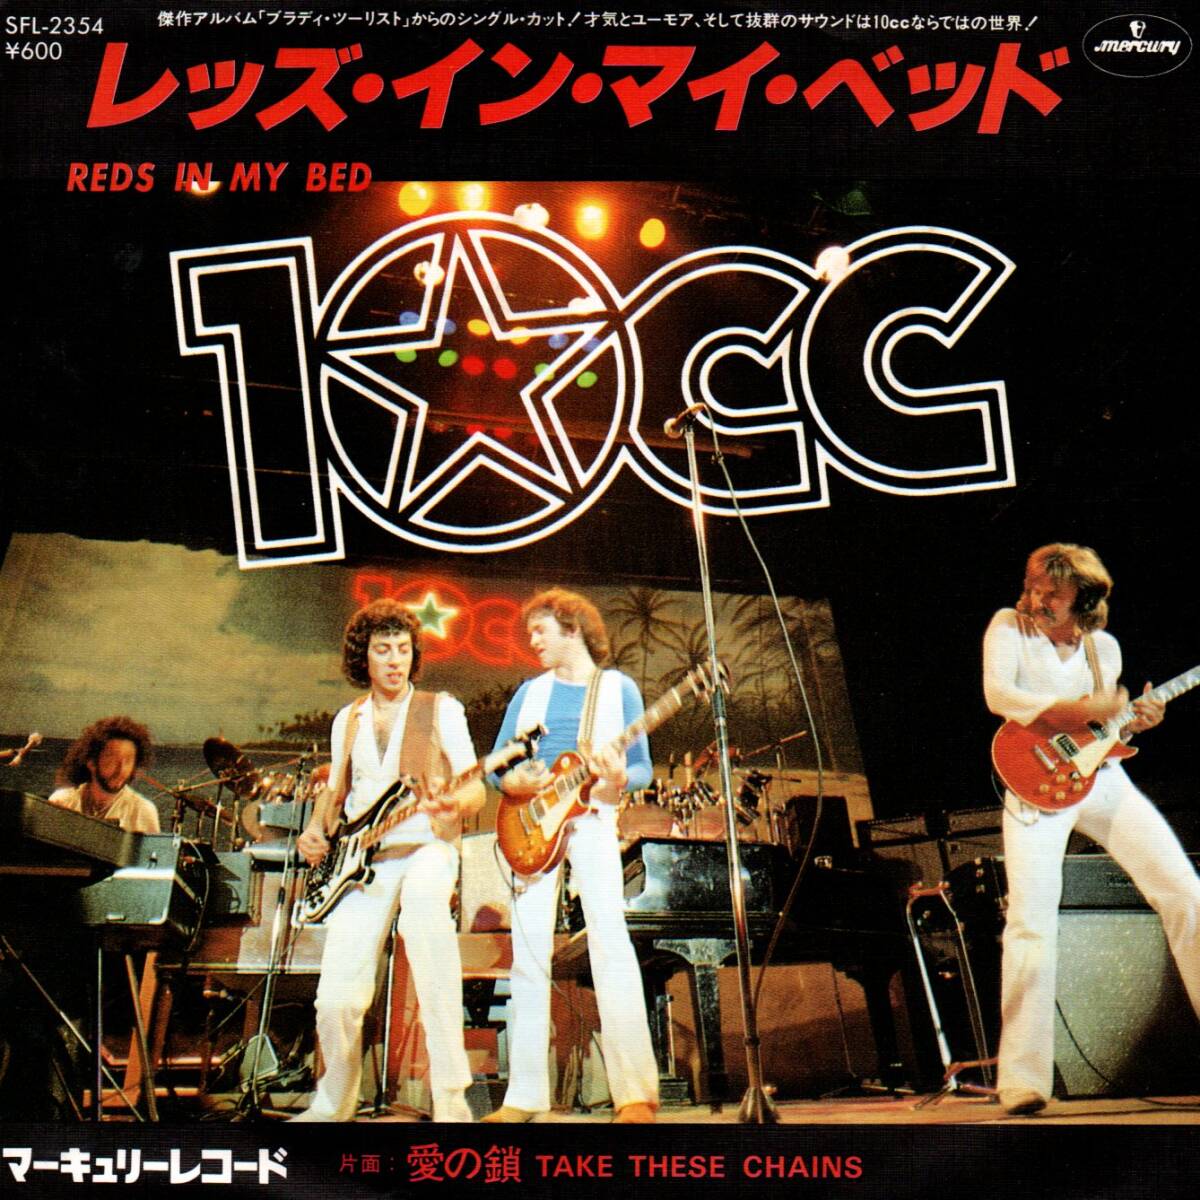 10cc 「Reds In My Bed/ Take These Chains」国内盤サンプルEPレコード _画像1